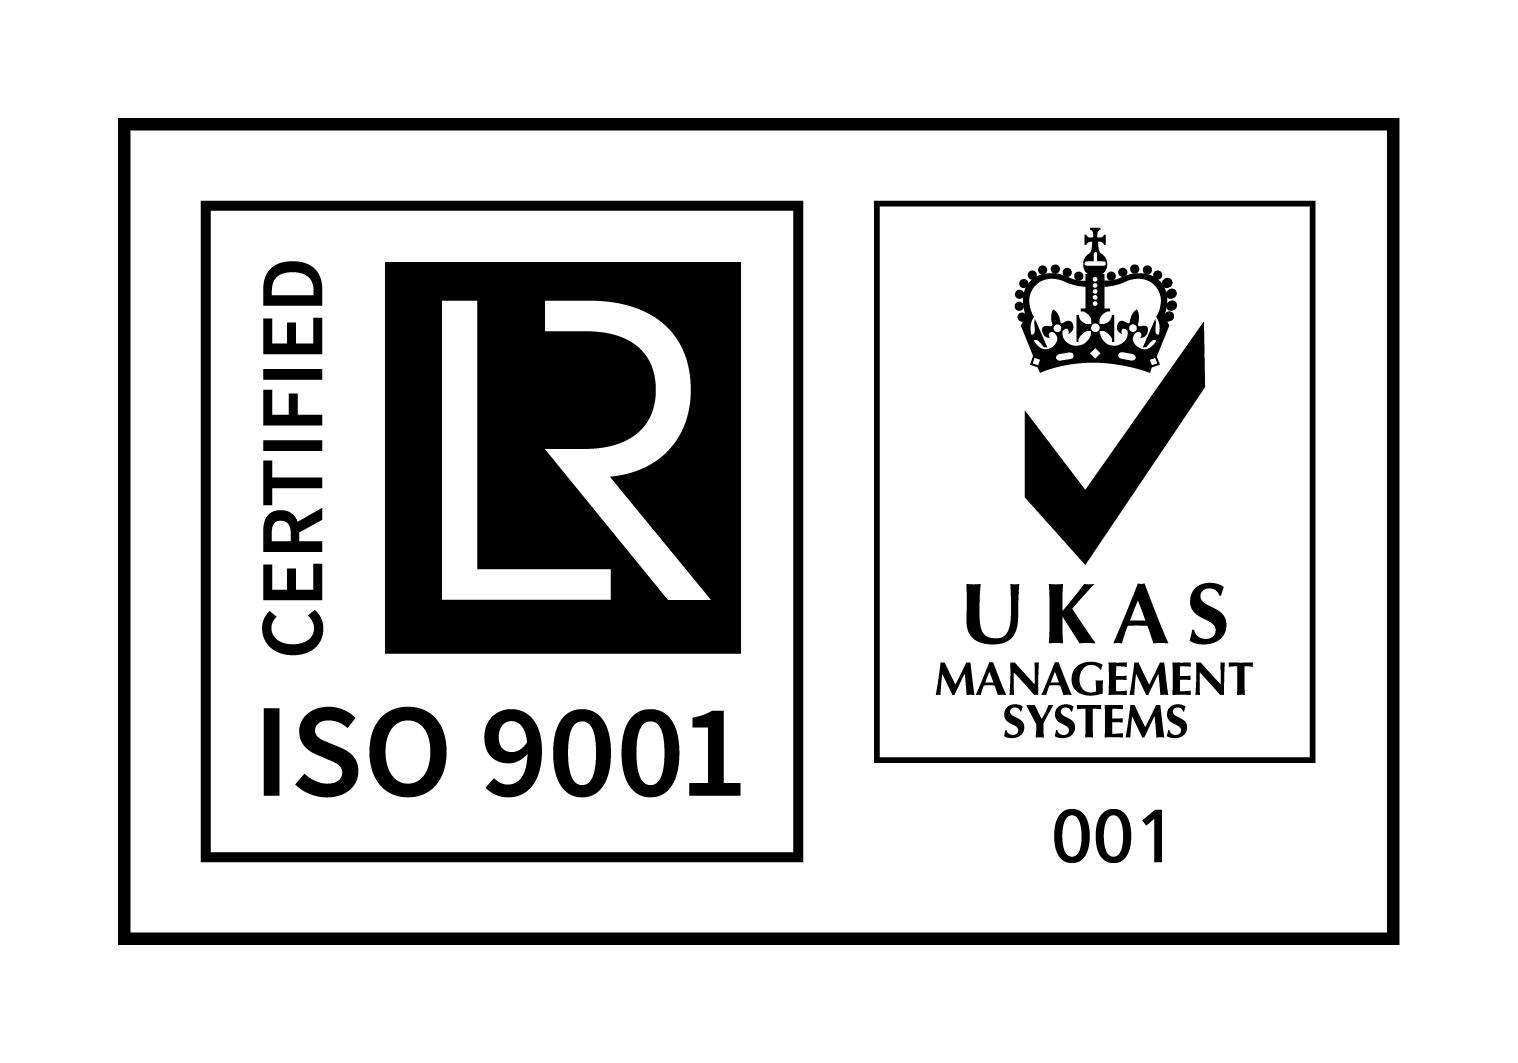 ISO:9001 2015 quality management systems